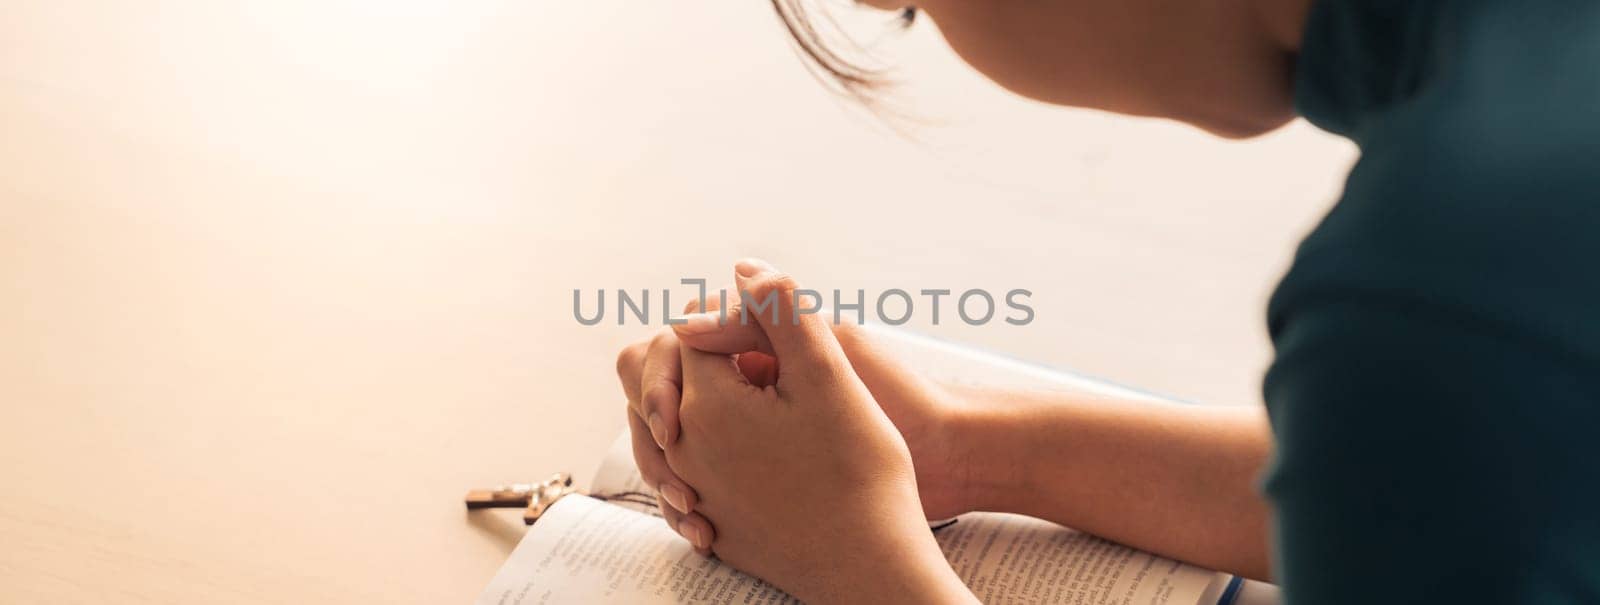 Female folding hand pray to god faithfully with believe in god blessing to happiness at wooden church. Concept of hope, religion, christianity and god blessing. Warm and brown background. Burgeoning.